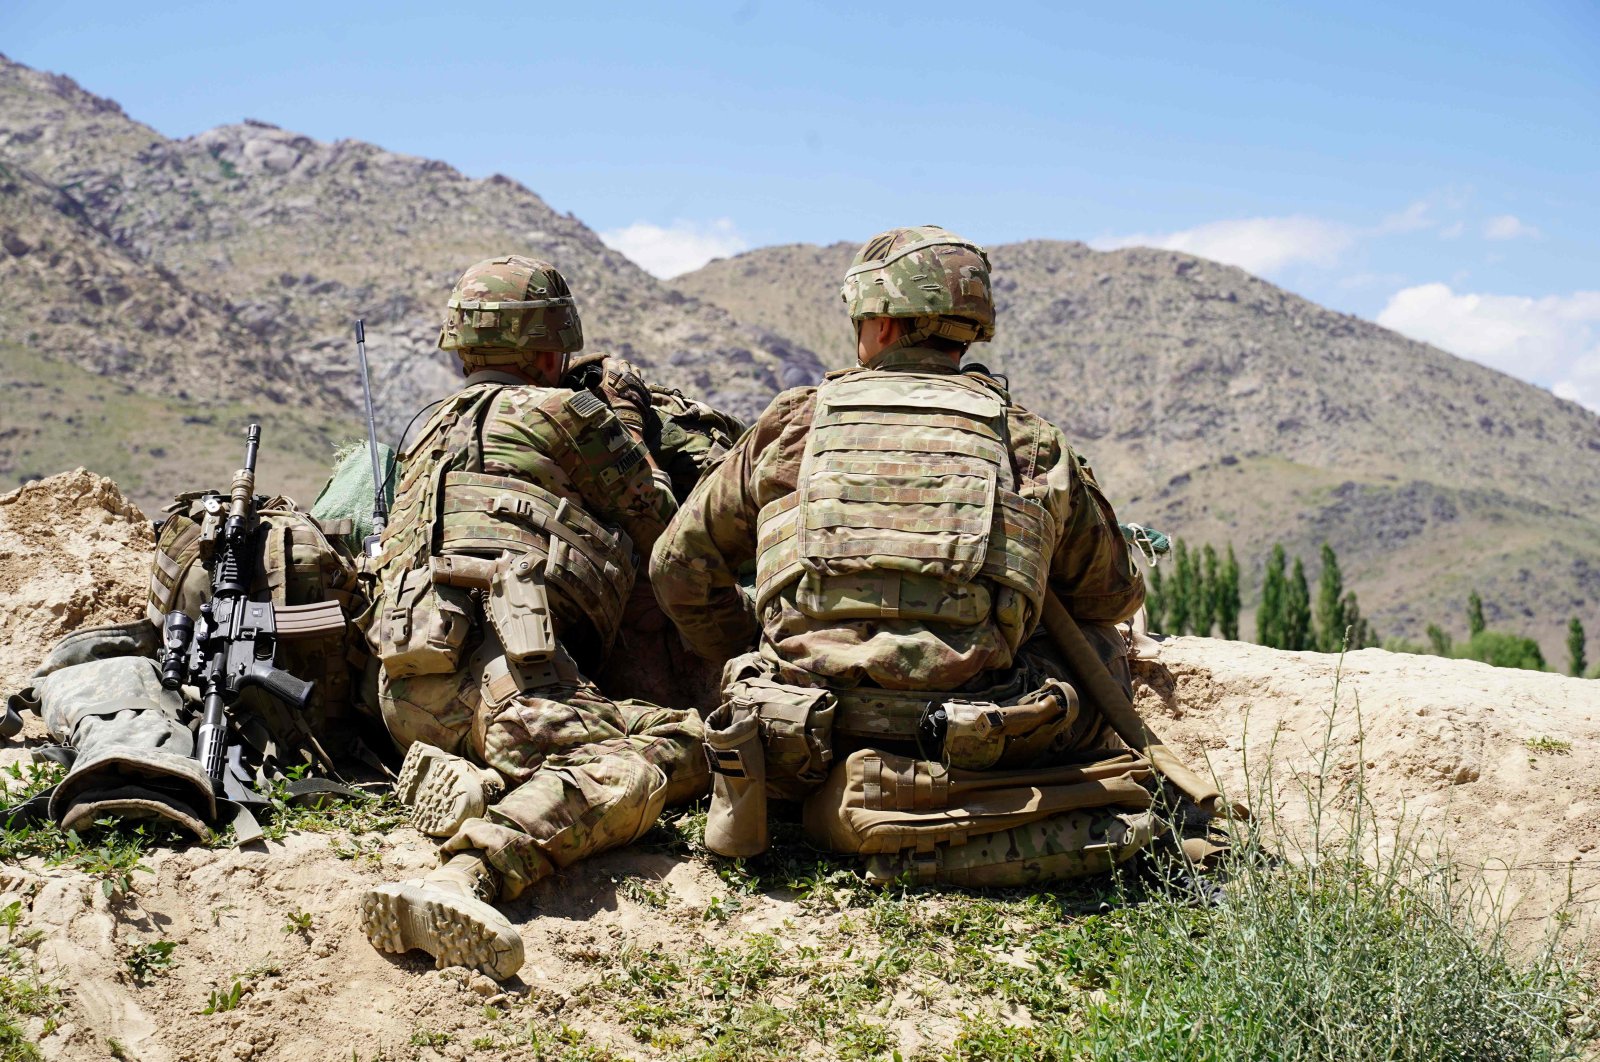 The U.S. soldiers look out over hillsides during a visit of the commander of US and NATO forces in Afghanistan General Scott Miller at the Afghan National Army (ANA) checkpoint in Nerkh district of Wardak province, June 6, 2019. (AFP)